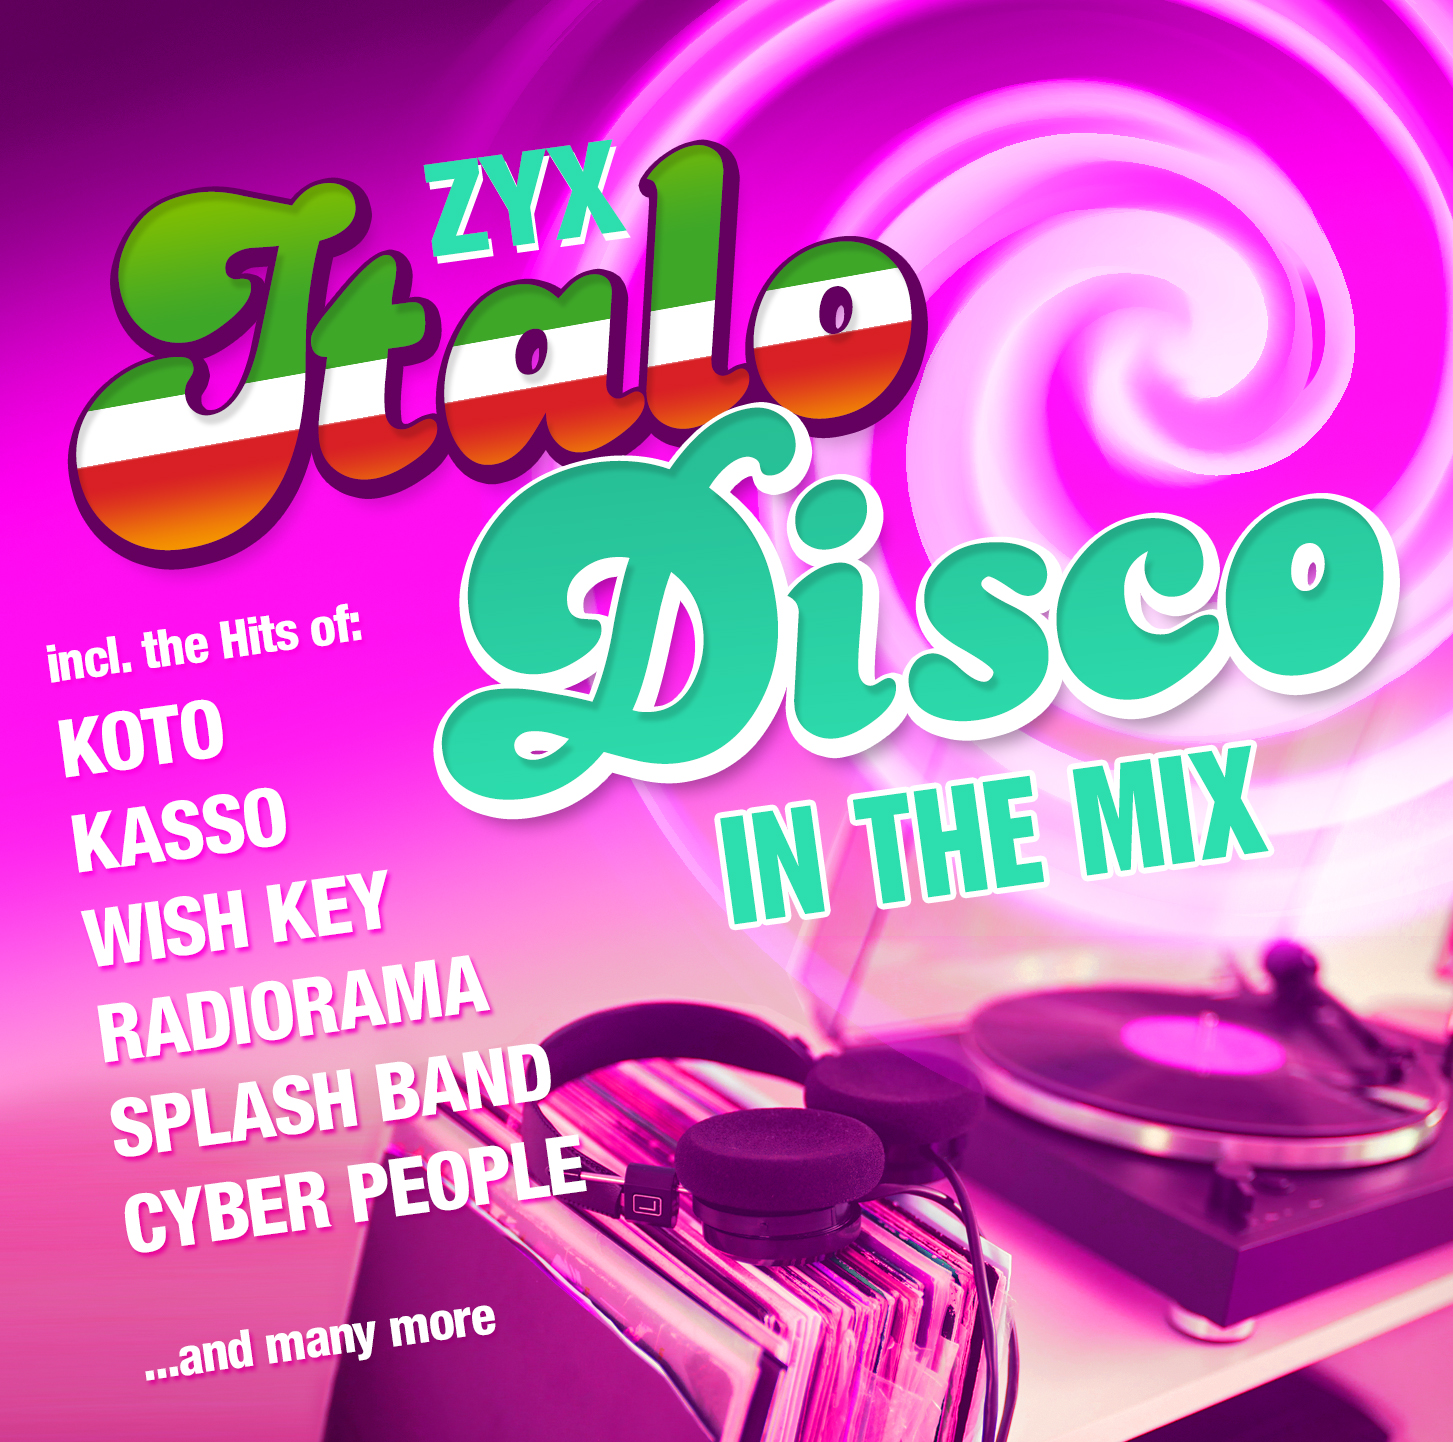 CD Zyx Italo Disco in the Mix from Various Artists | eBay